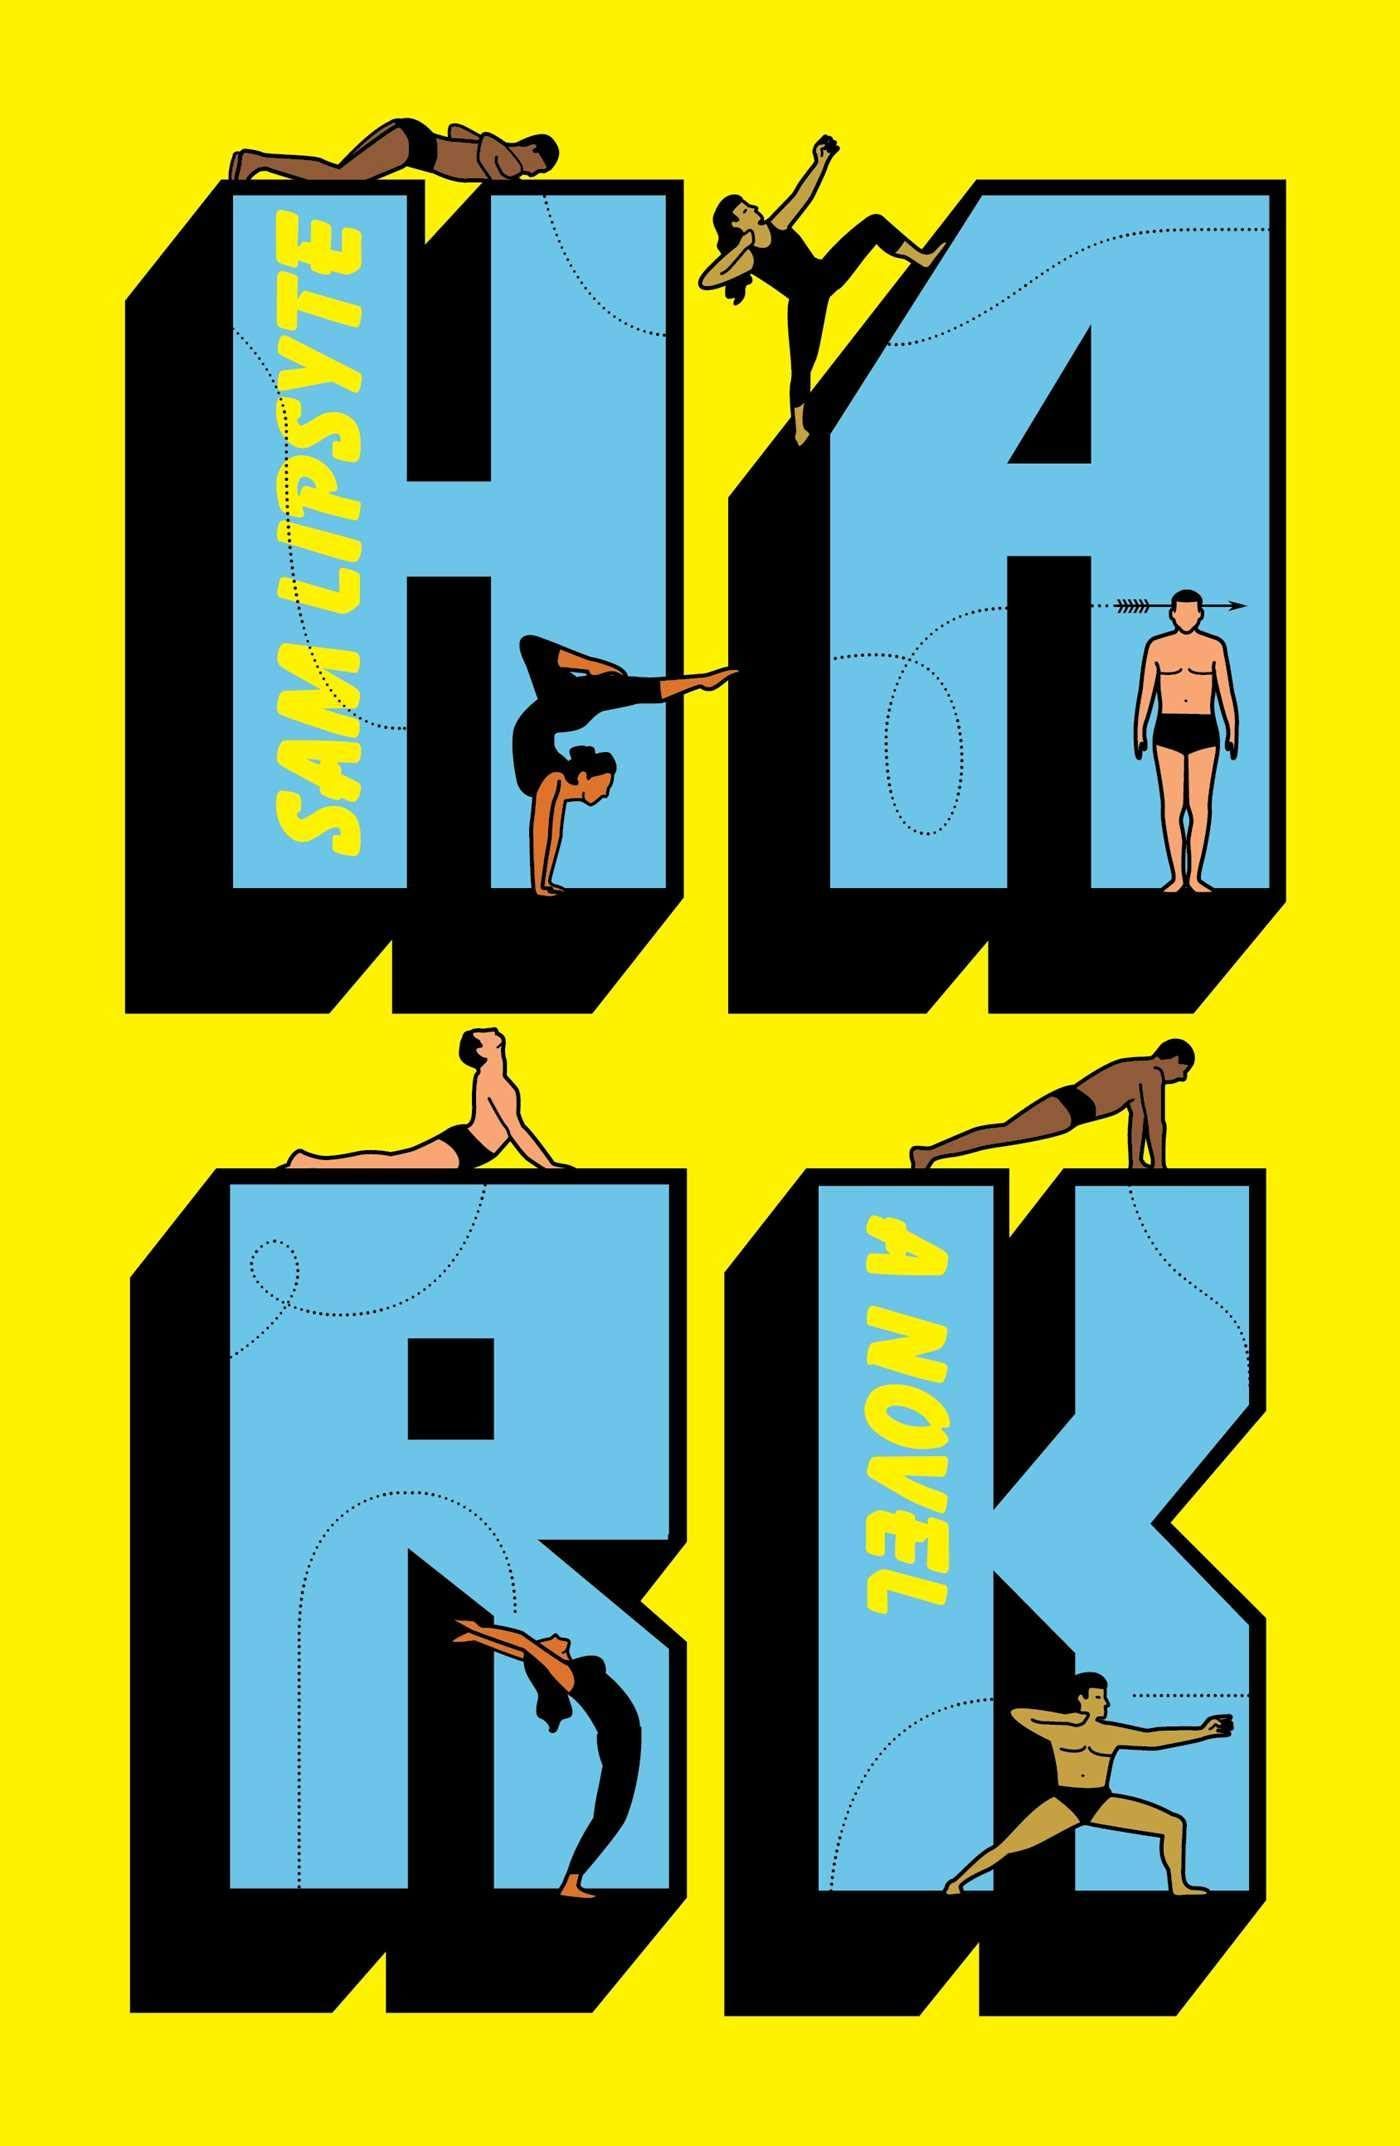 Pamphlets for Sale: How Sam Lipsyte’s “Hark” Will Save Us All